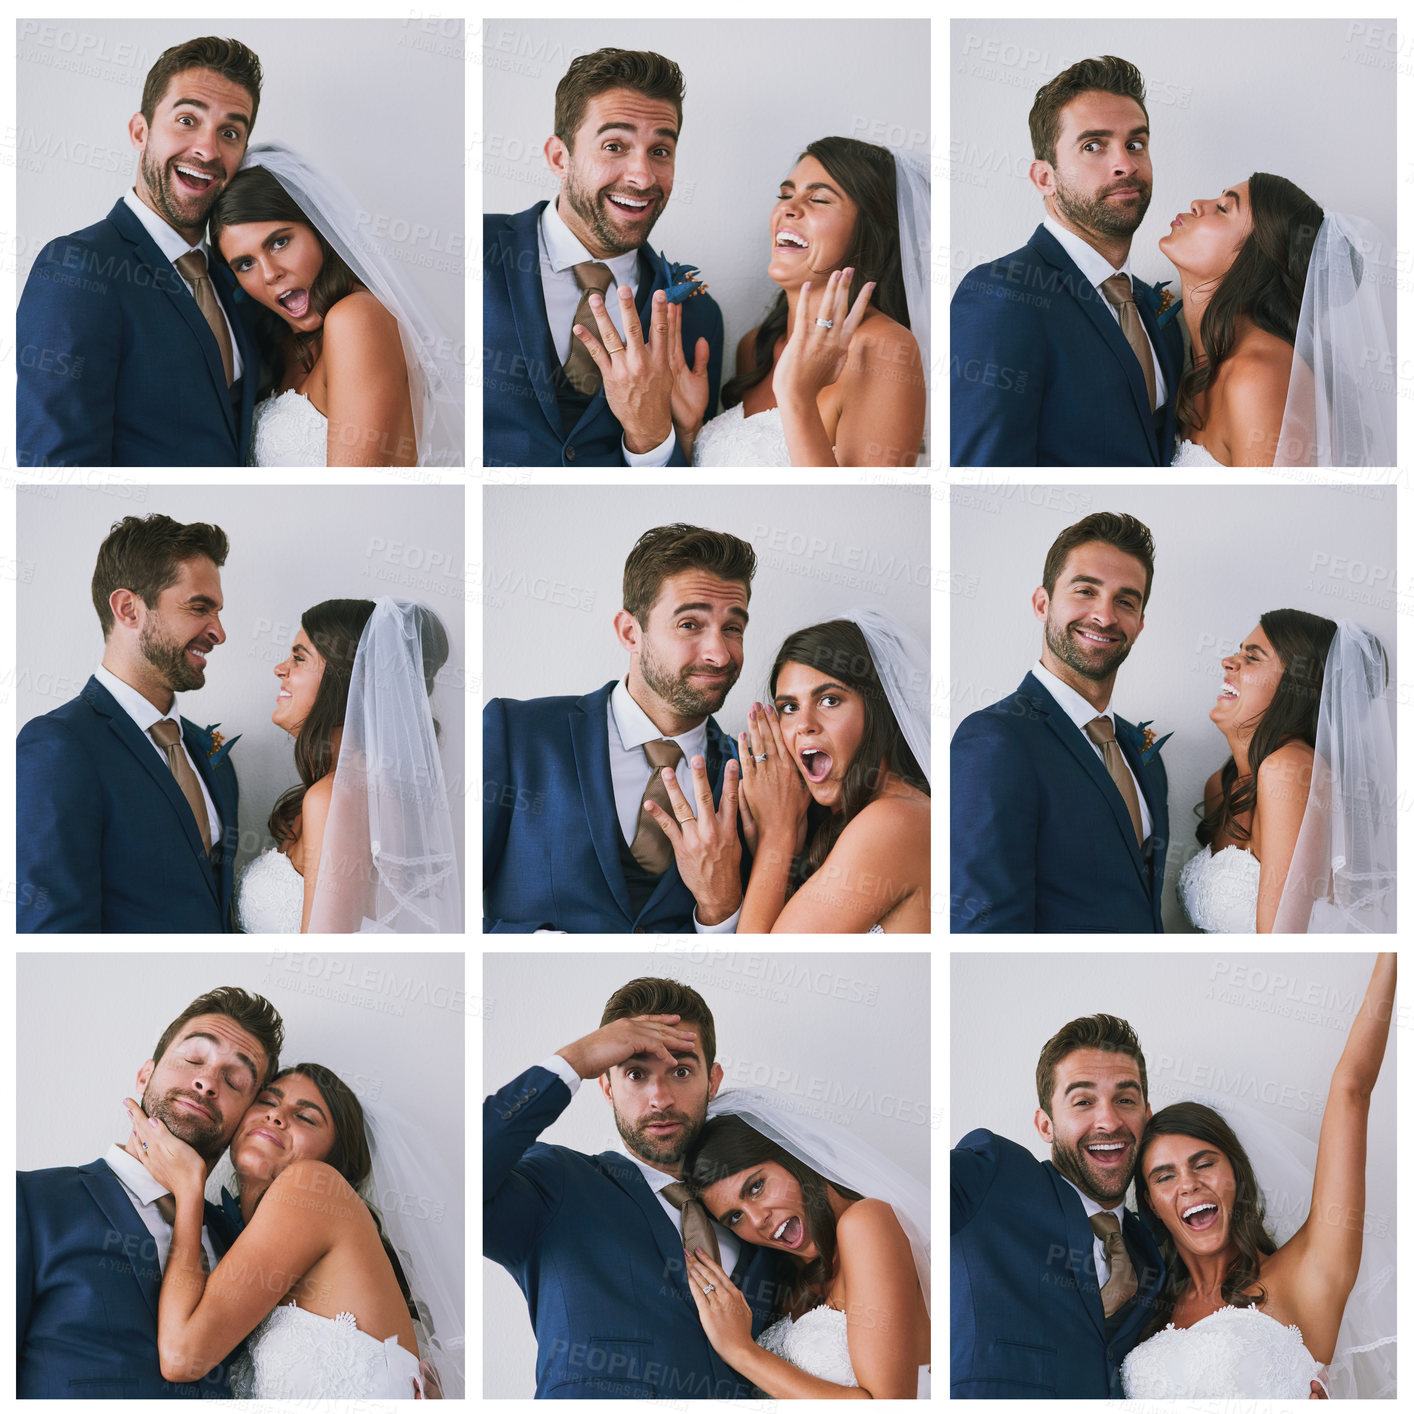 Buy stock photo Composite studio image of a newly married young couple in various fun poses against a gray background